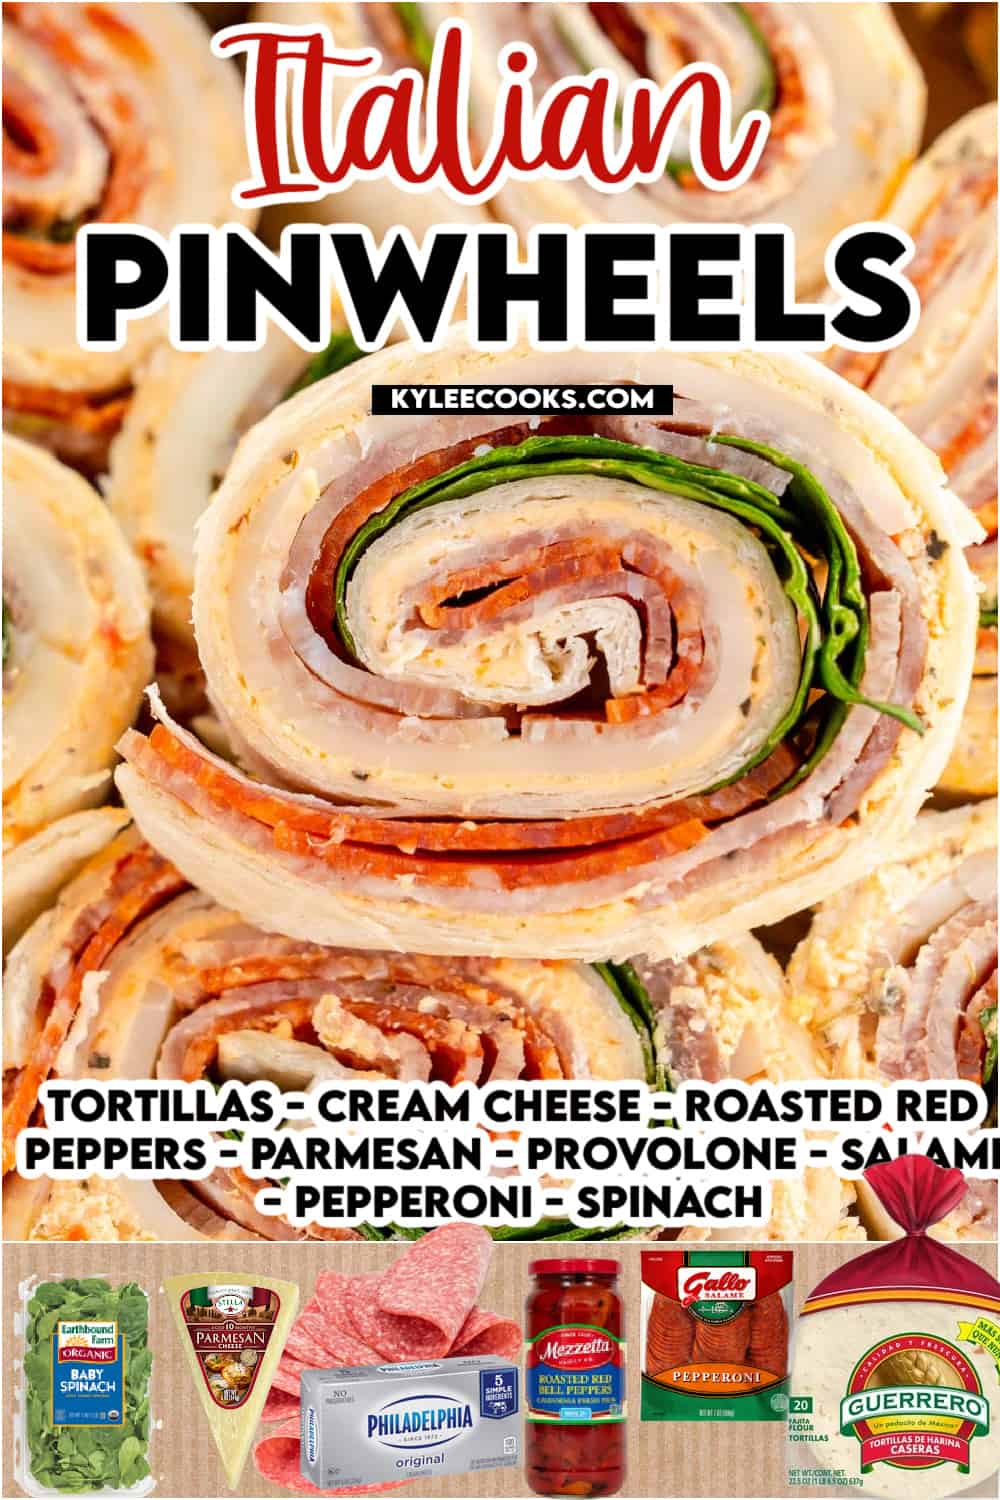 sliced italian pinwheel with recipe name and ingredients overlaid in text.